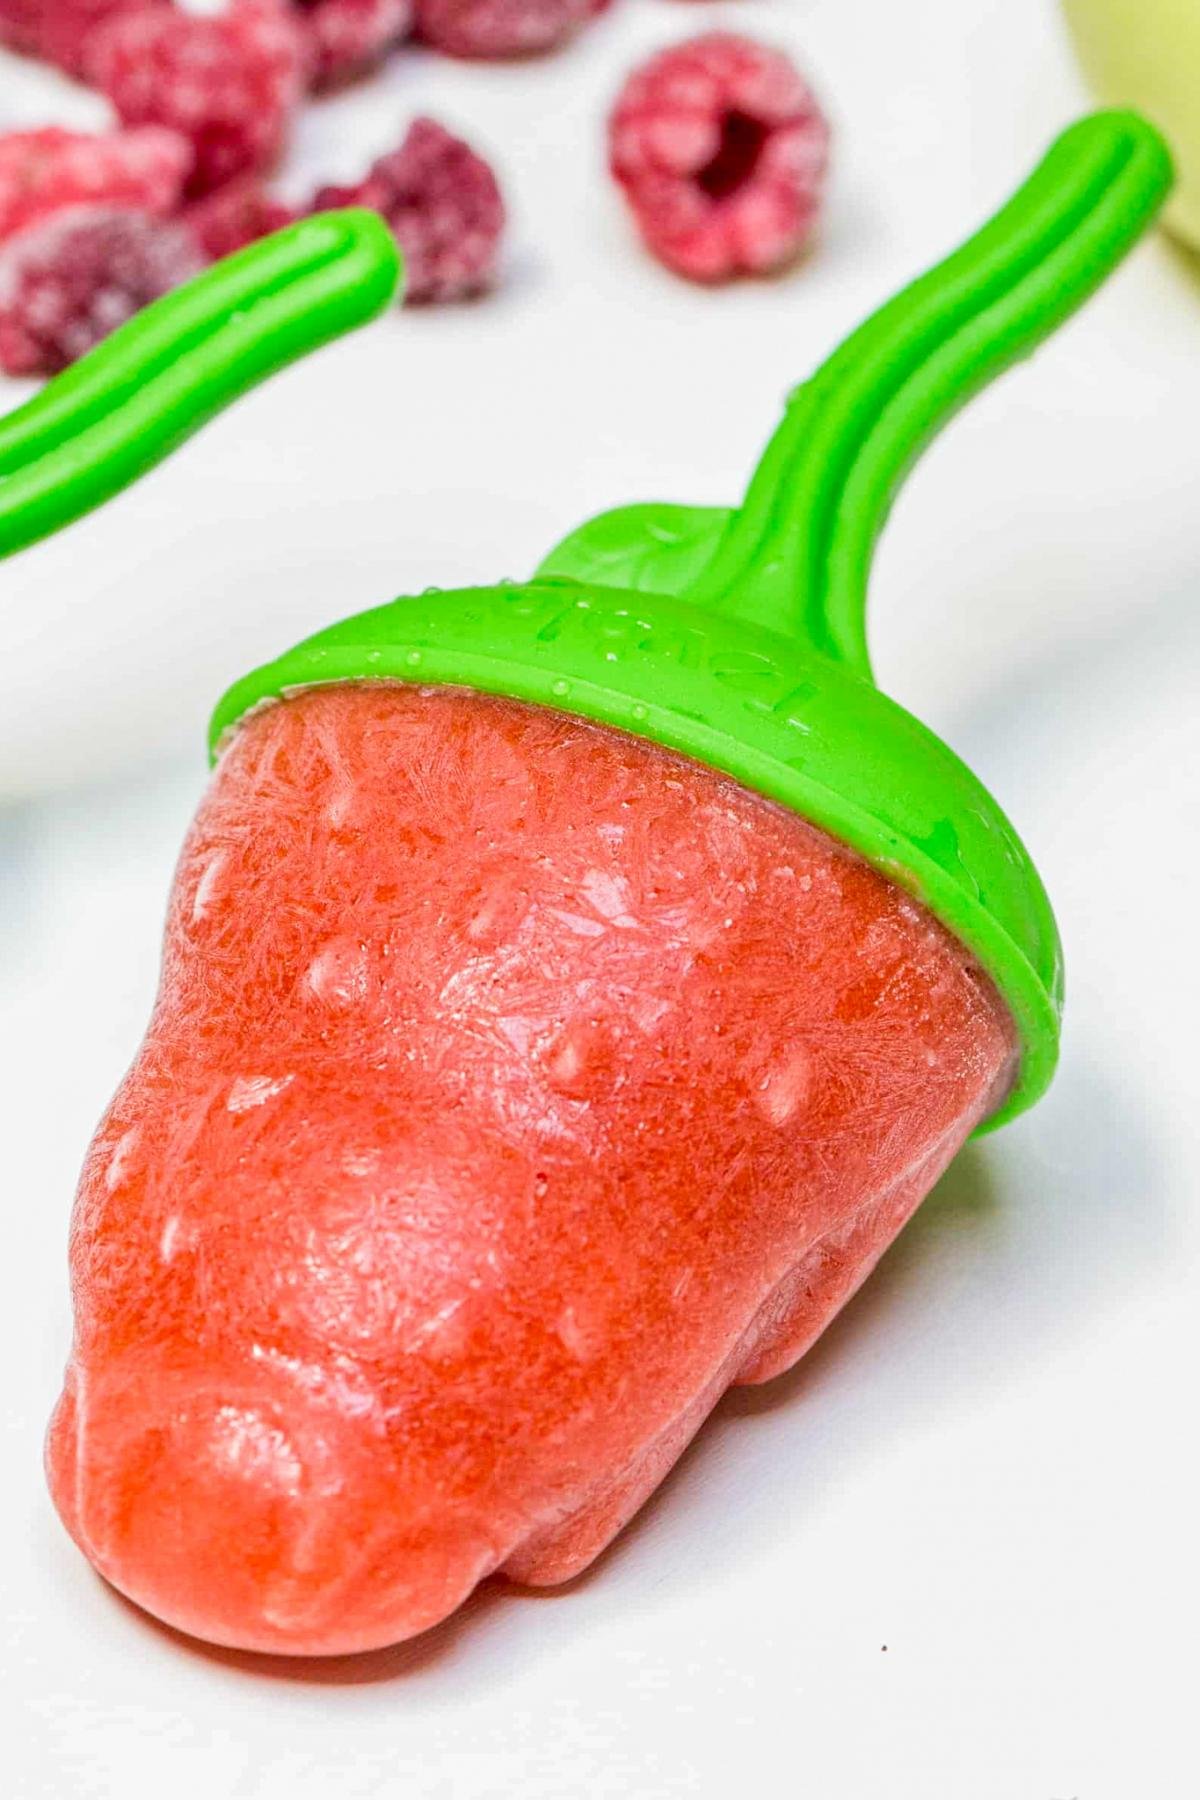 5 Easy DIY Popsicle Molds You Can Make At Home